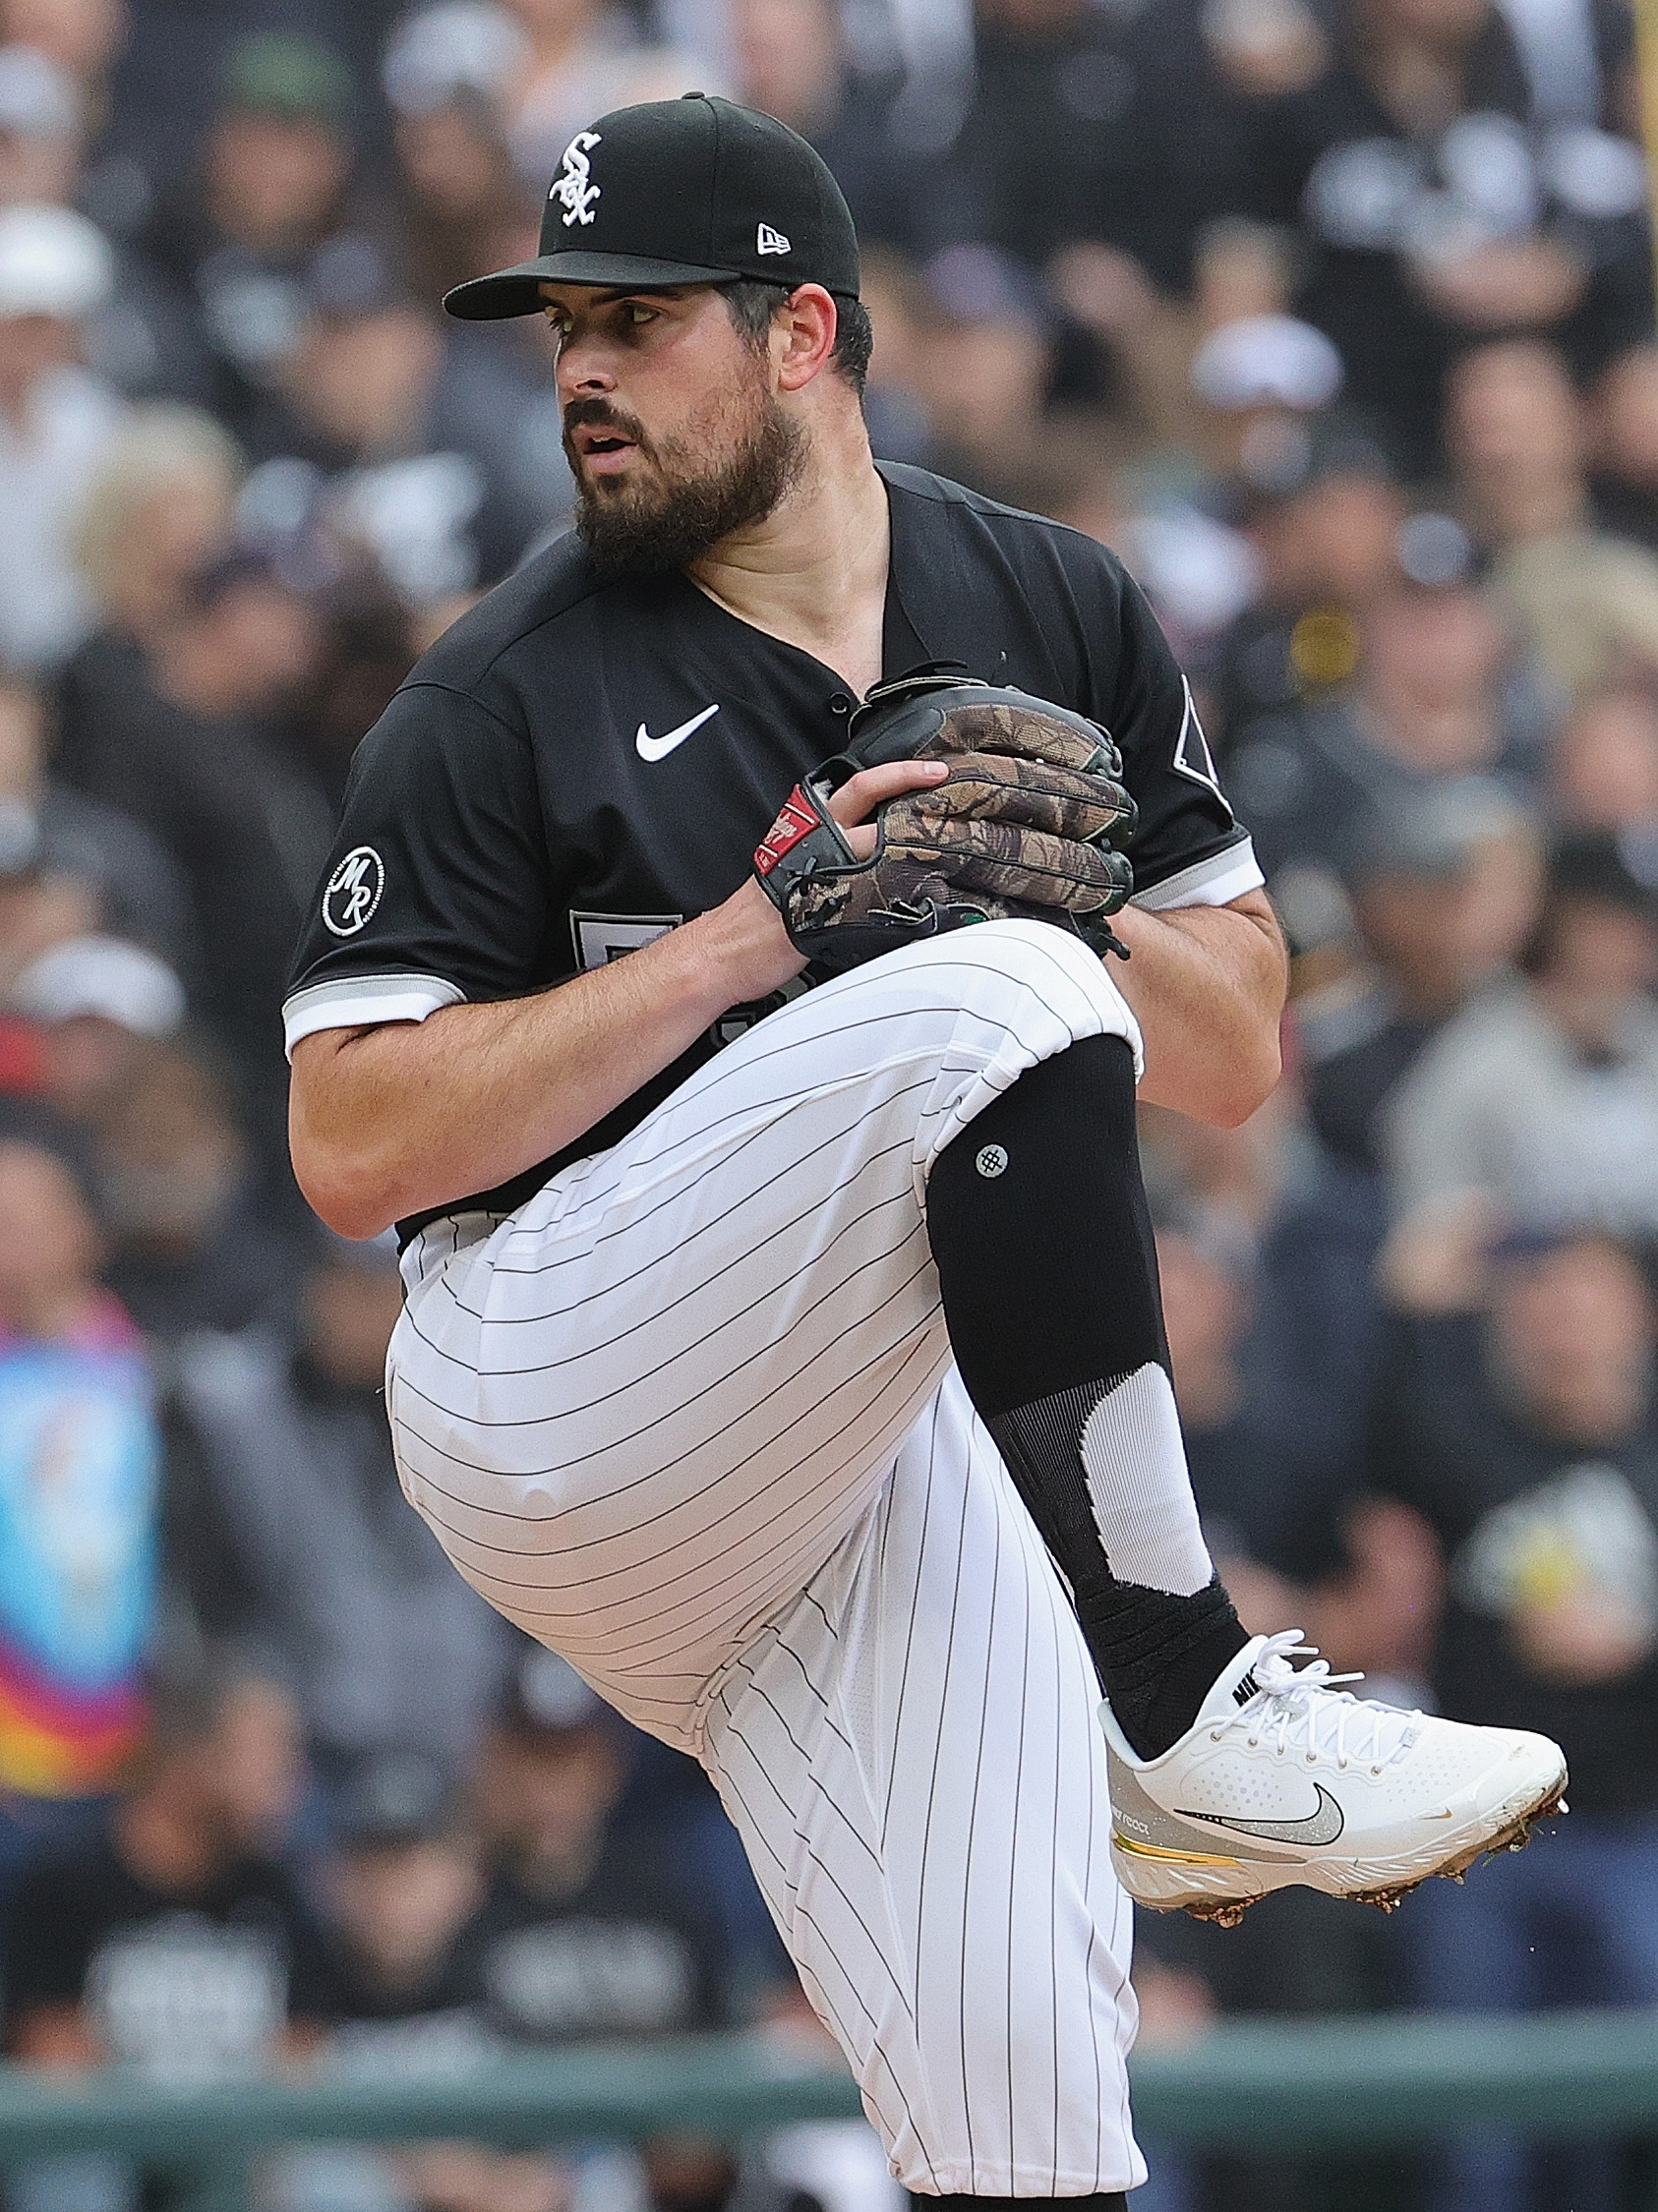 Starting pitcher Carlos Rodon #55 of the Chicago White Sox delivers the ball against the Houston Astros at Guaranteed Rate Field on October 12, 2021 in Chicago, Illinois. The Astros defeated the White Sox 10-1.